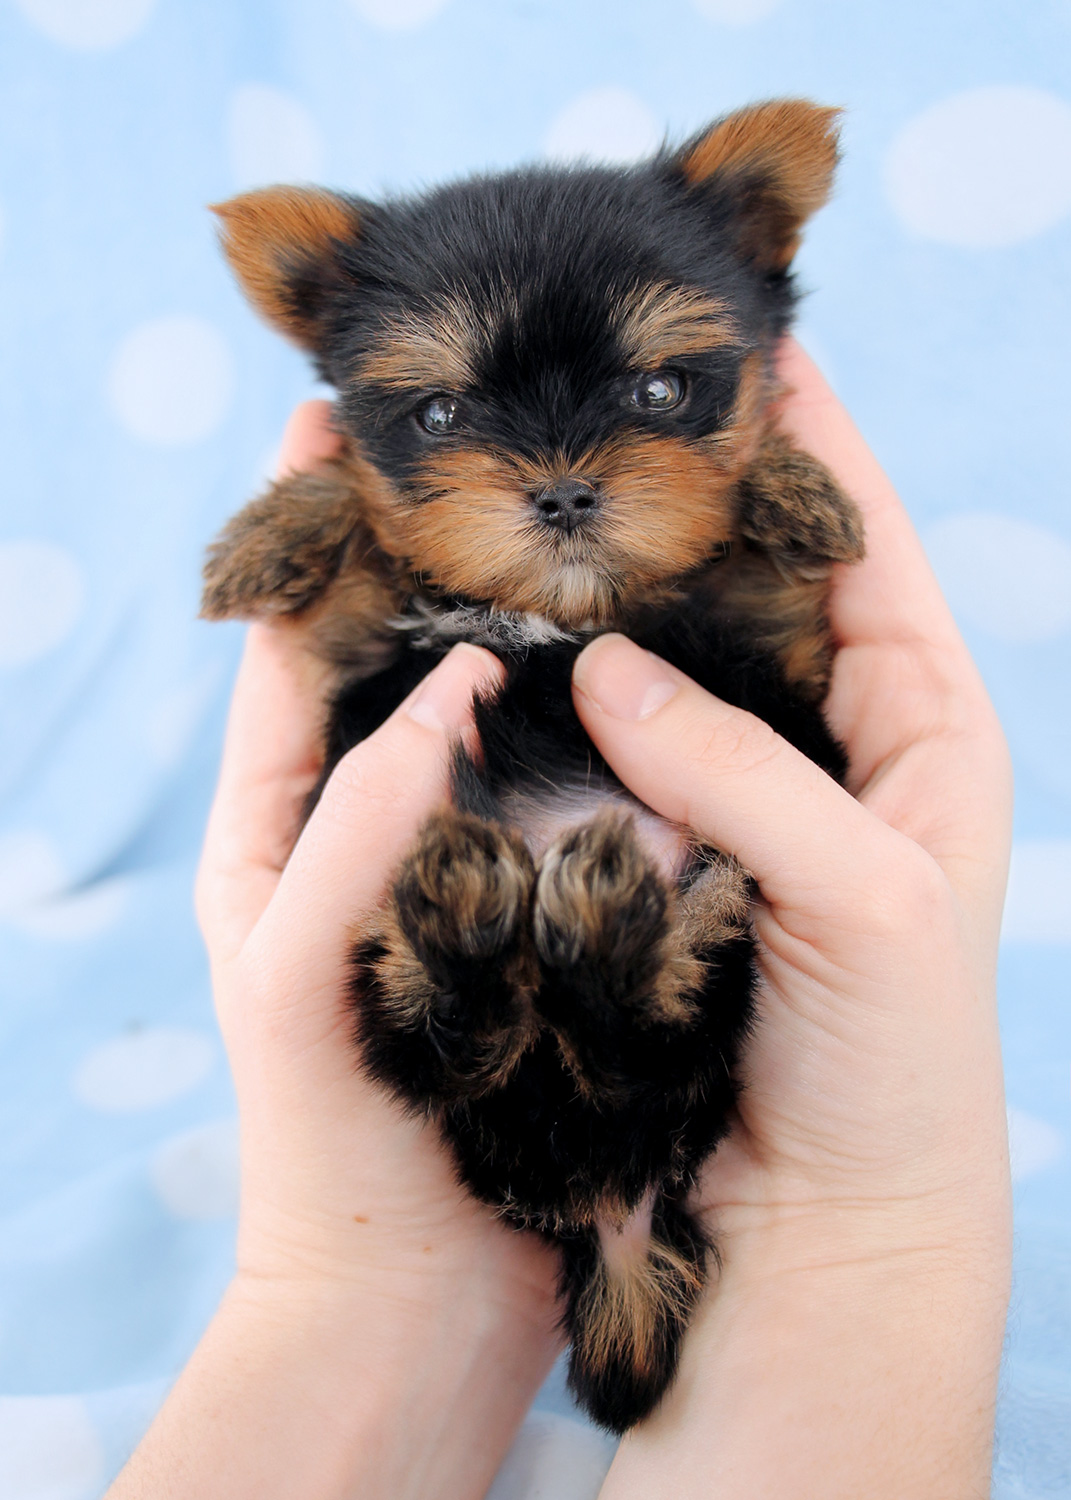 Cute Teacup Yorkshire "Yorkie" Terrier Puppies for Sale ...